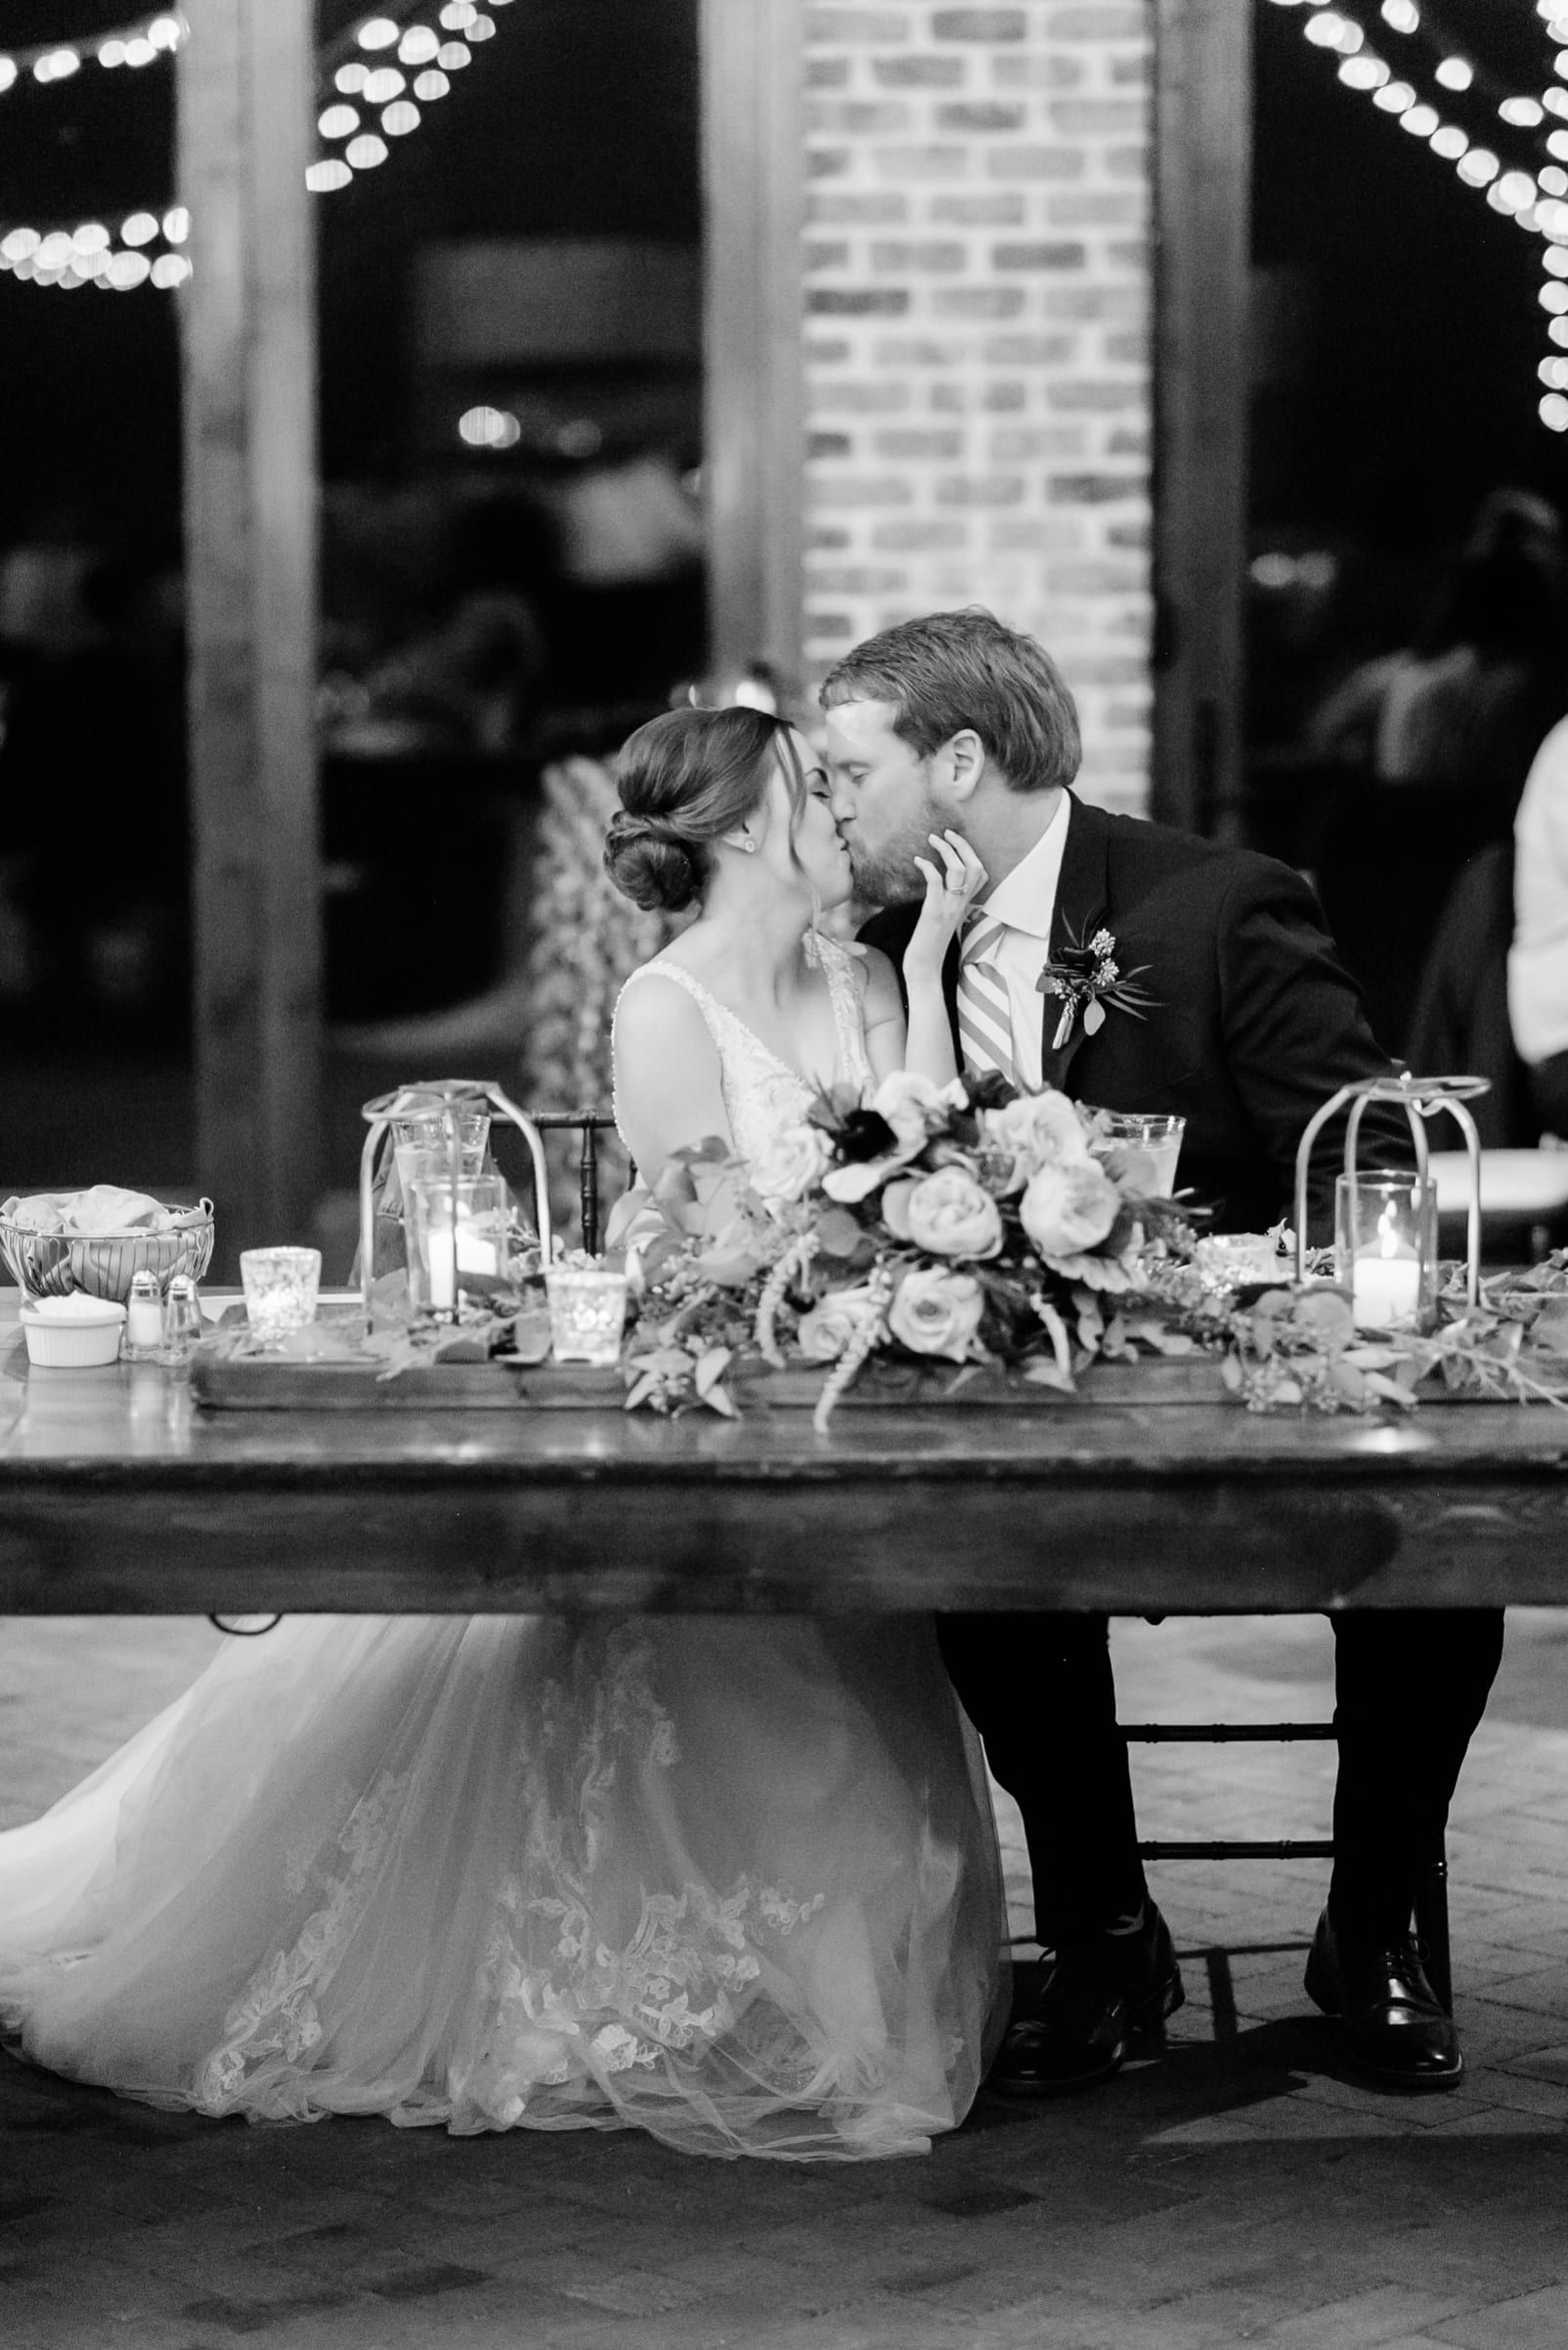 Sutherland Estate reception bride and groom kissing at the sweetheart table photo